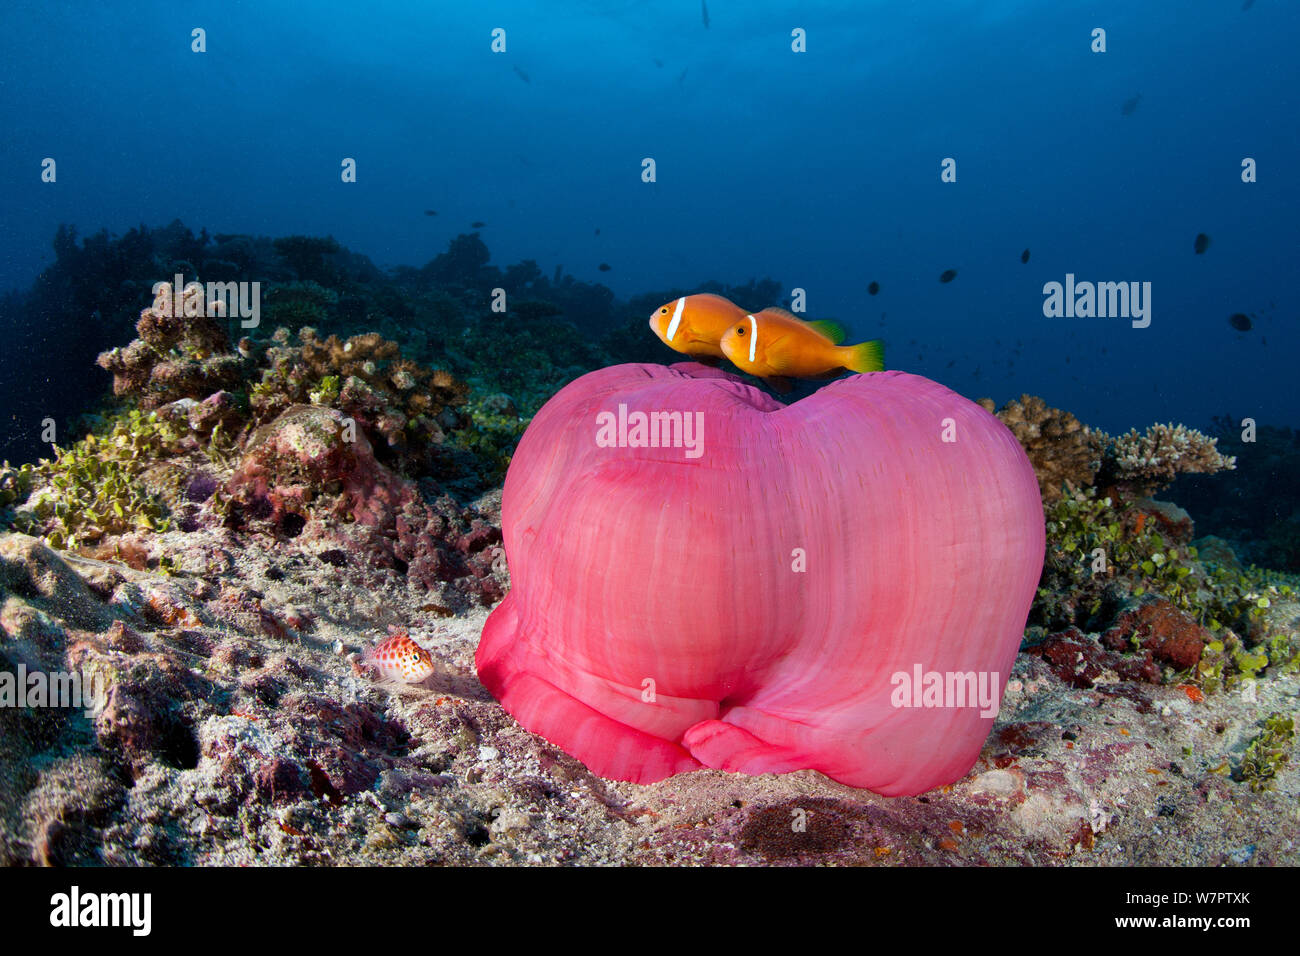 Maldives / Blackfoot anemonefish (Amphiprion nigripes) with Magnificent Sea anemone, Maldives, Indian Ocean Stock Photo